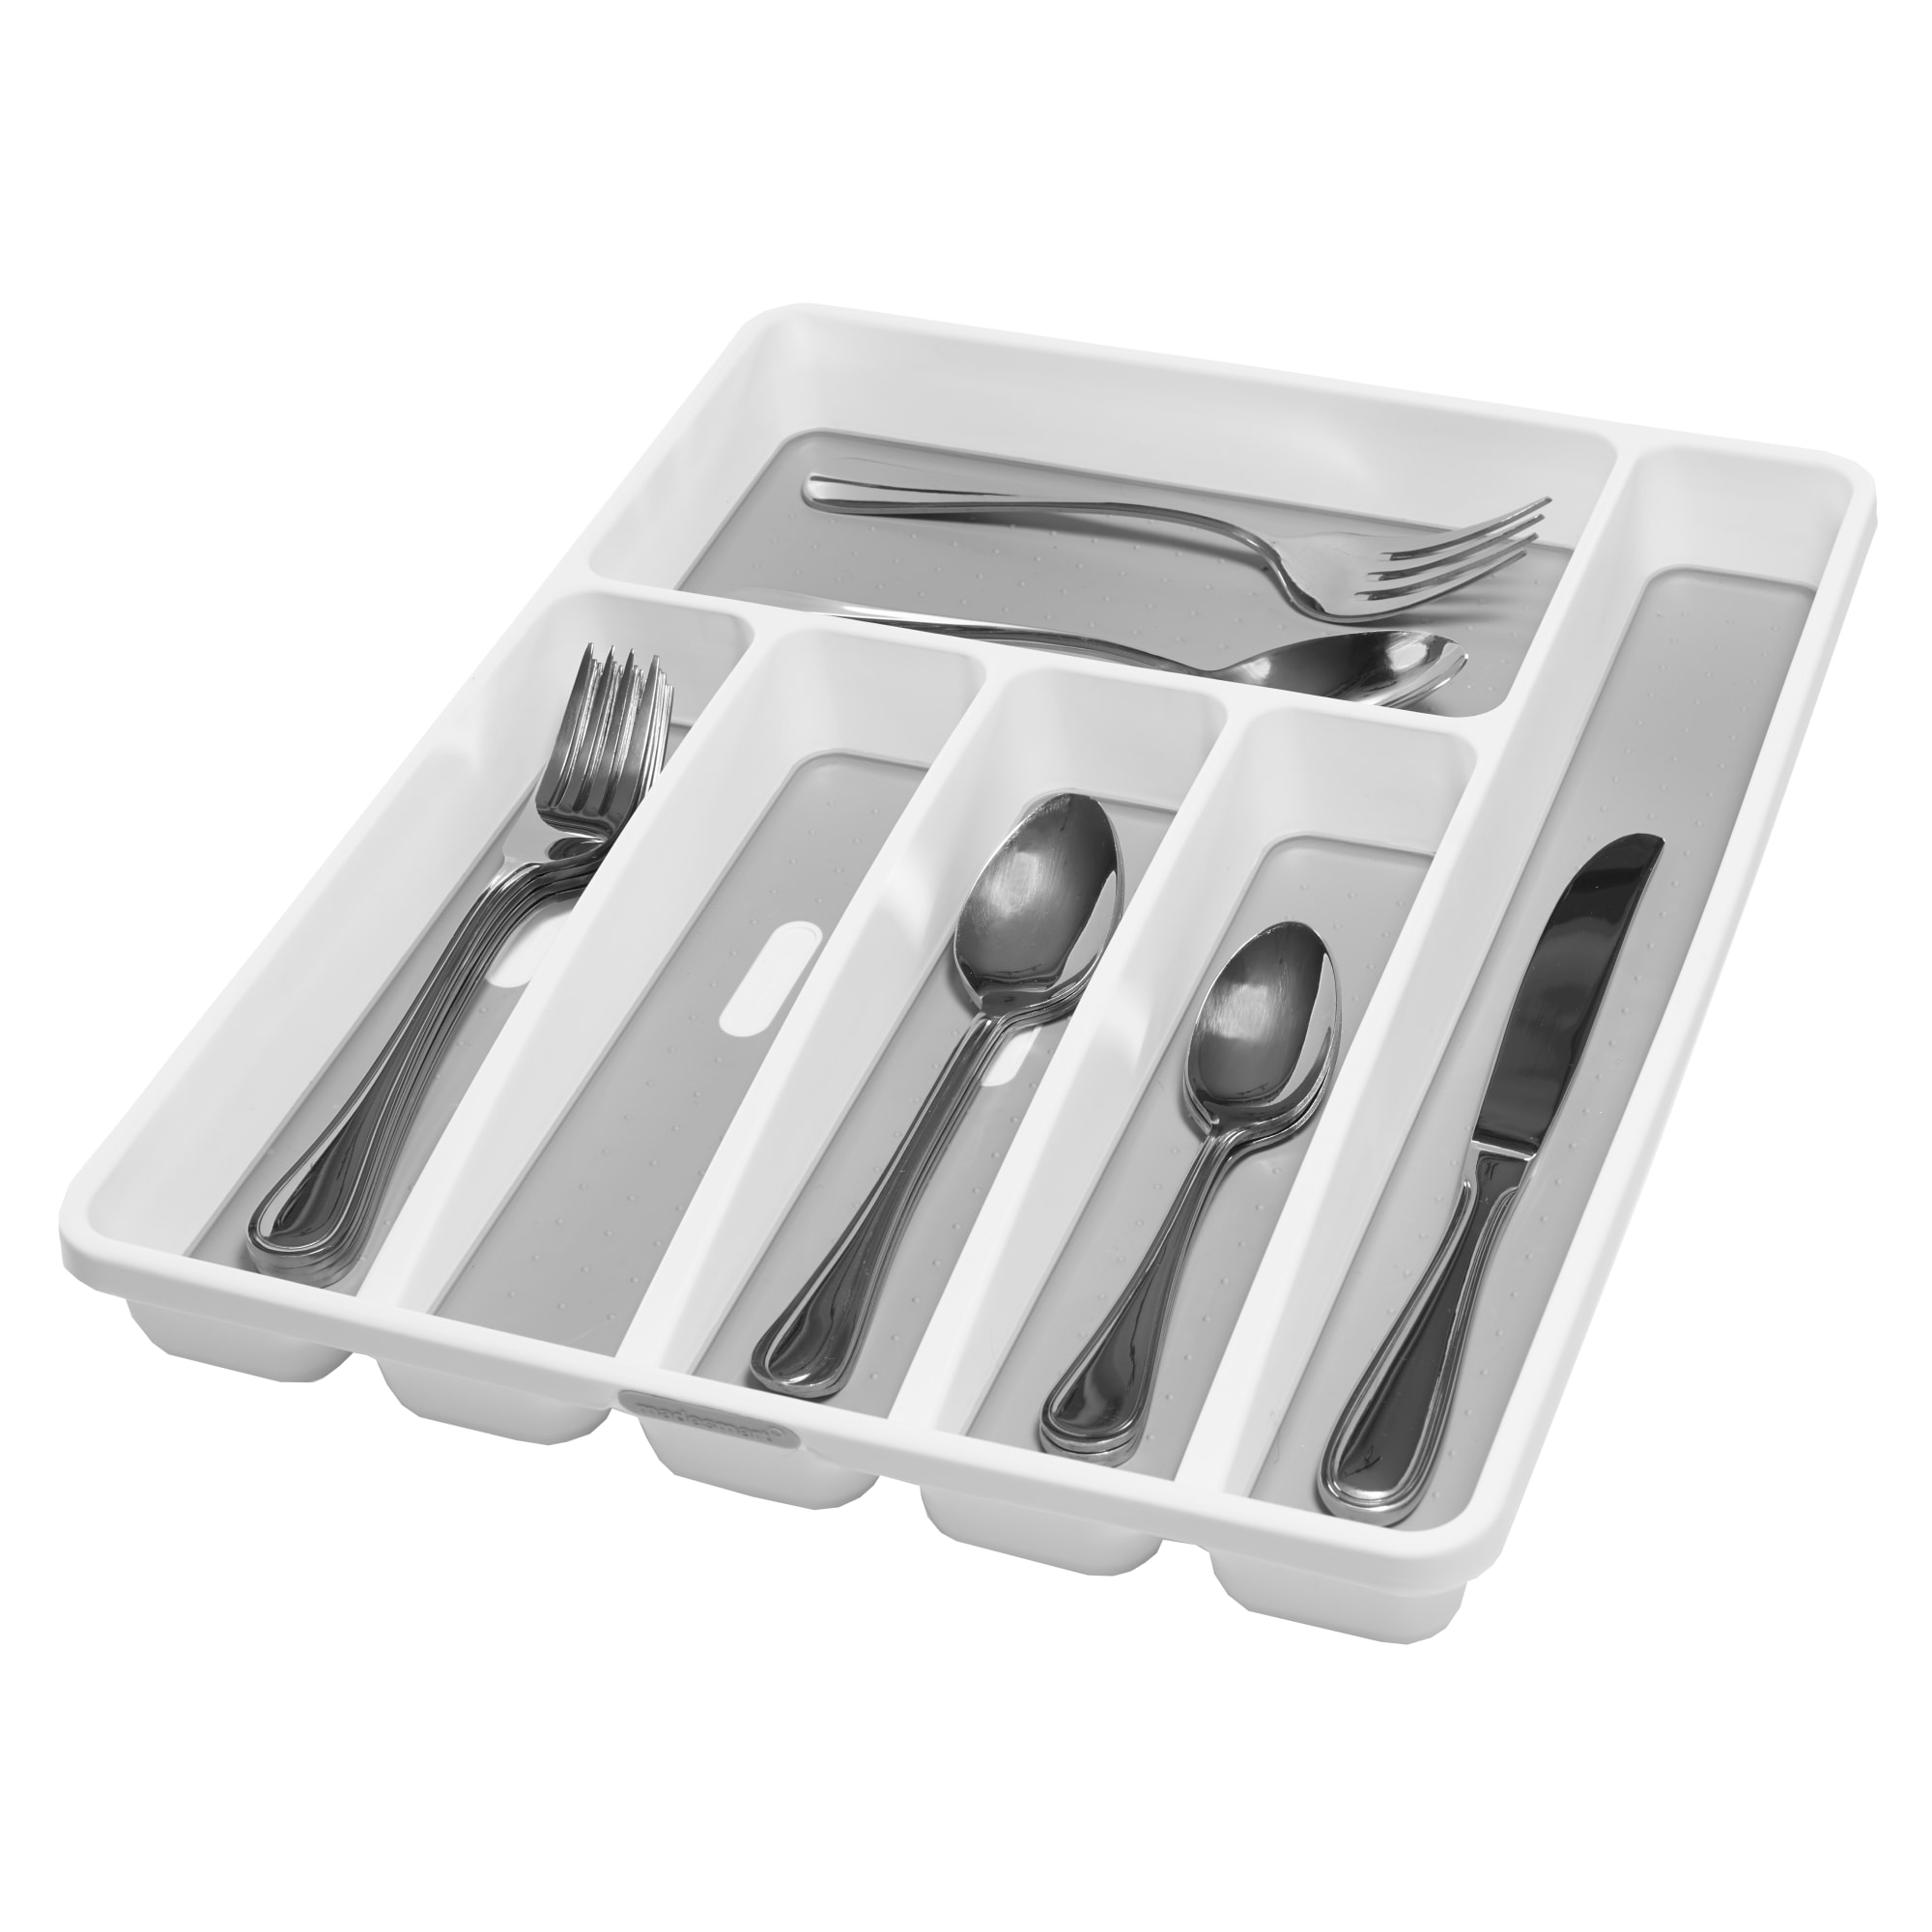 Madesmart Cutlery Tray 6 Compartment White Image 2